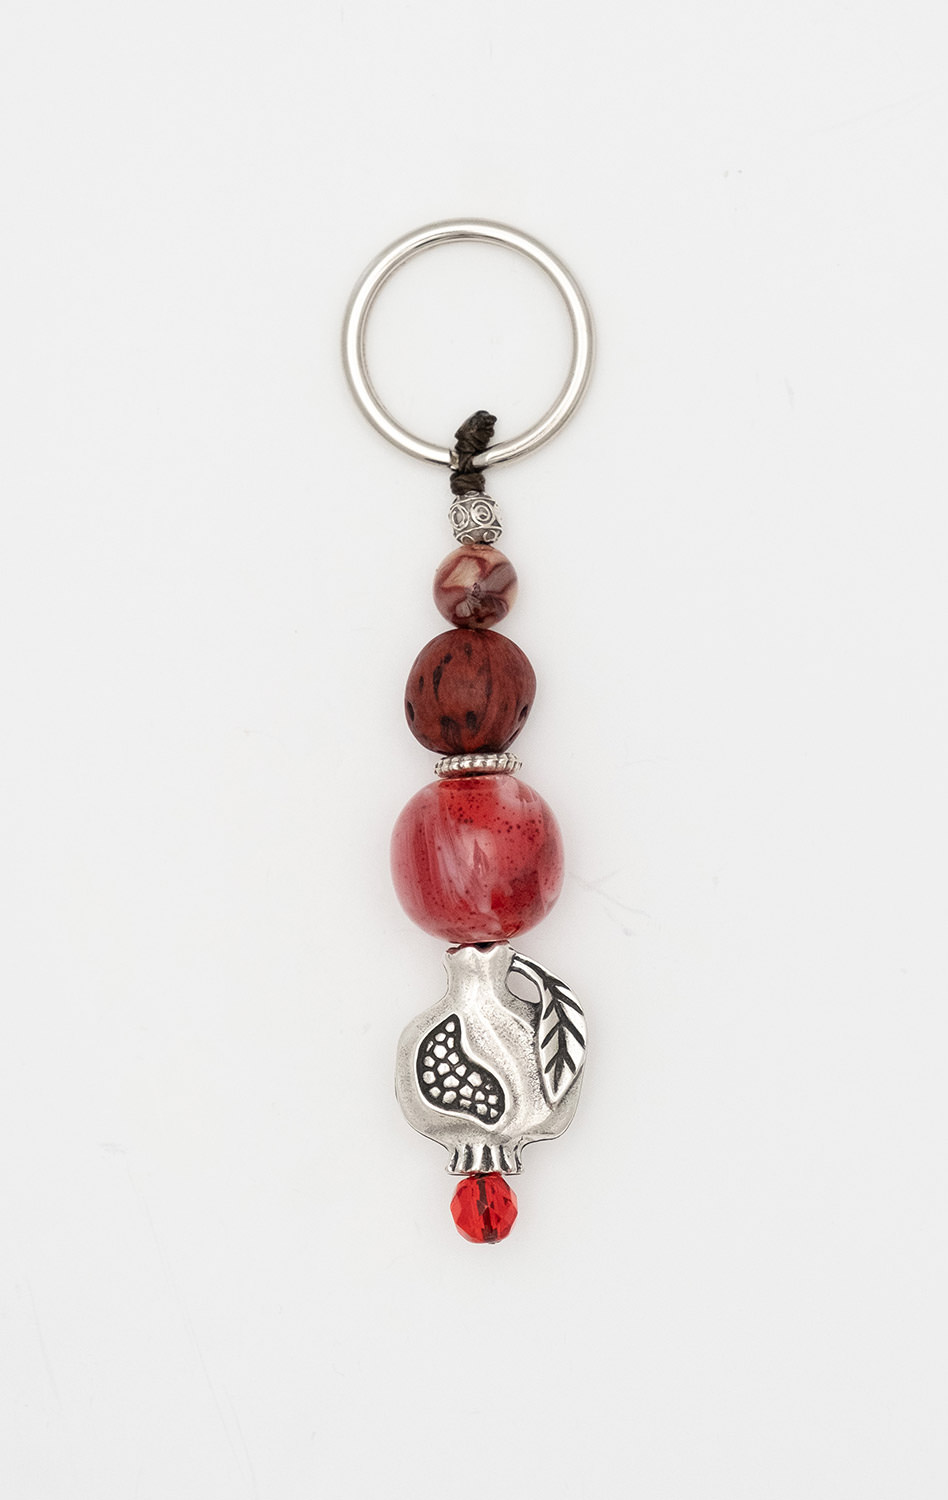 Keyring - amulet  made of artificial resin and conifer seed  with a pomegranate